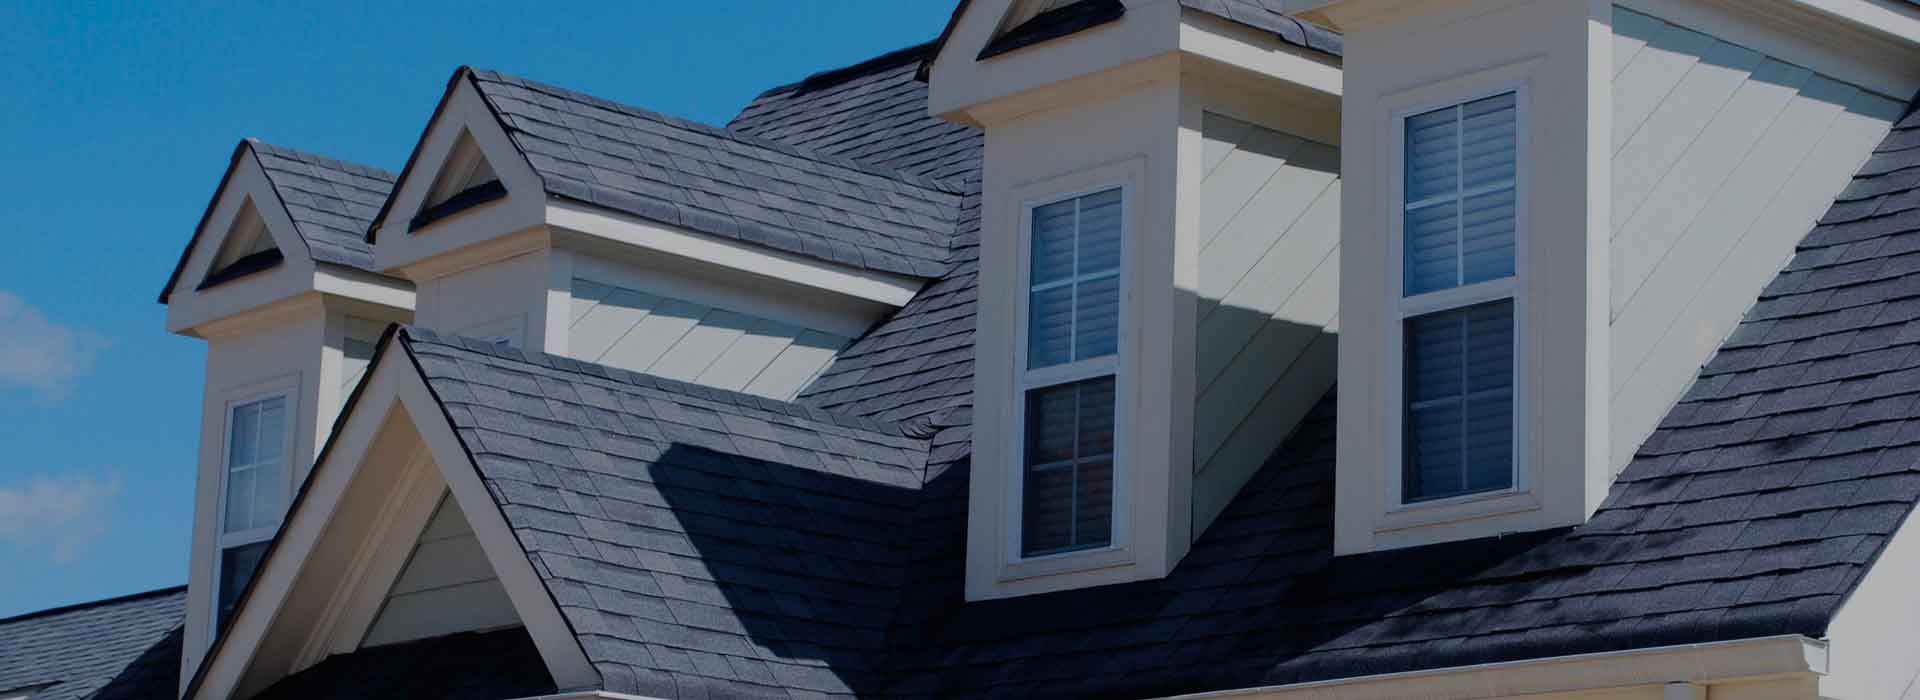 Yanes Roofing Company